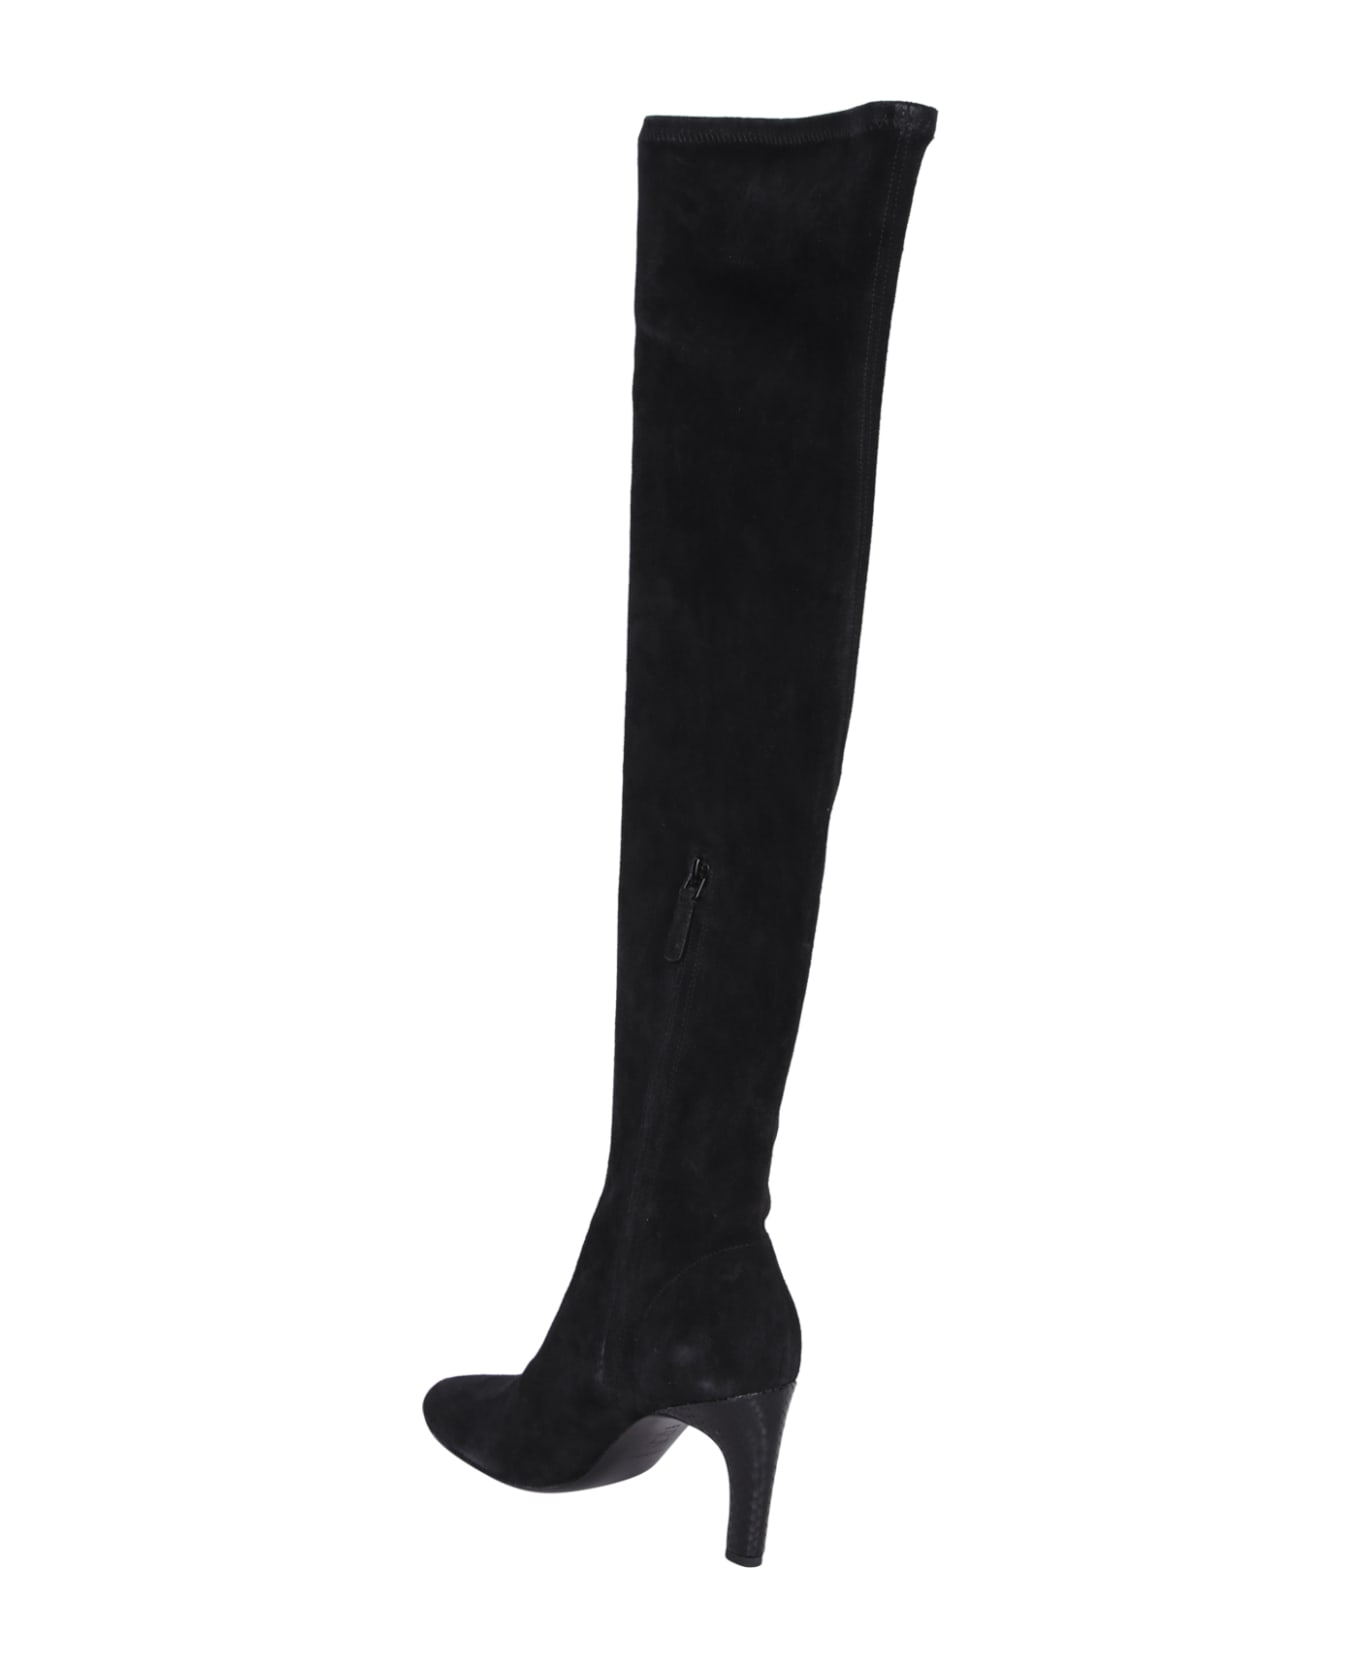 Tory Burch Over The Knee Boots - Black